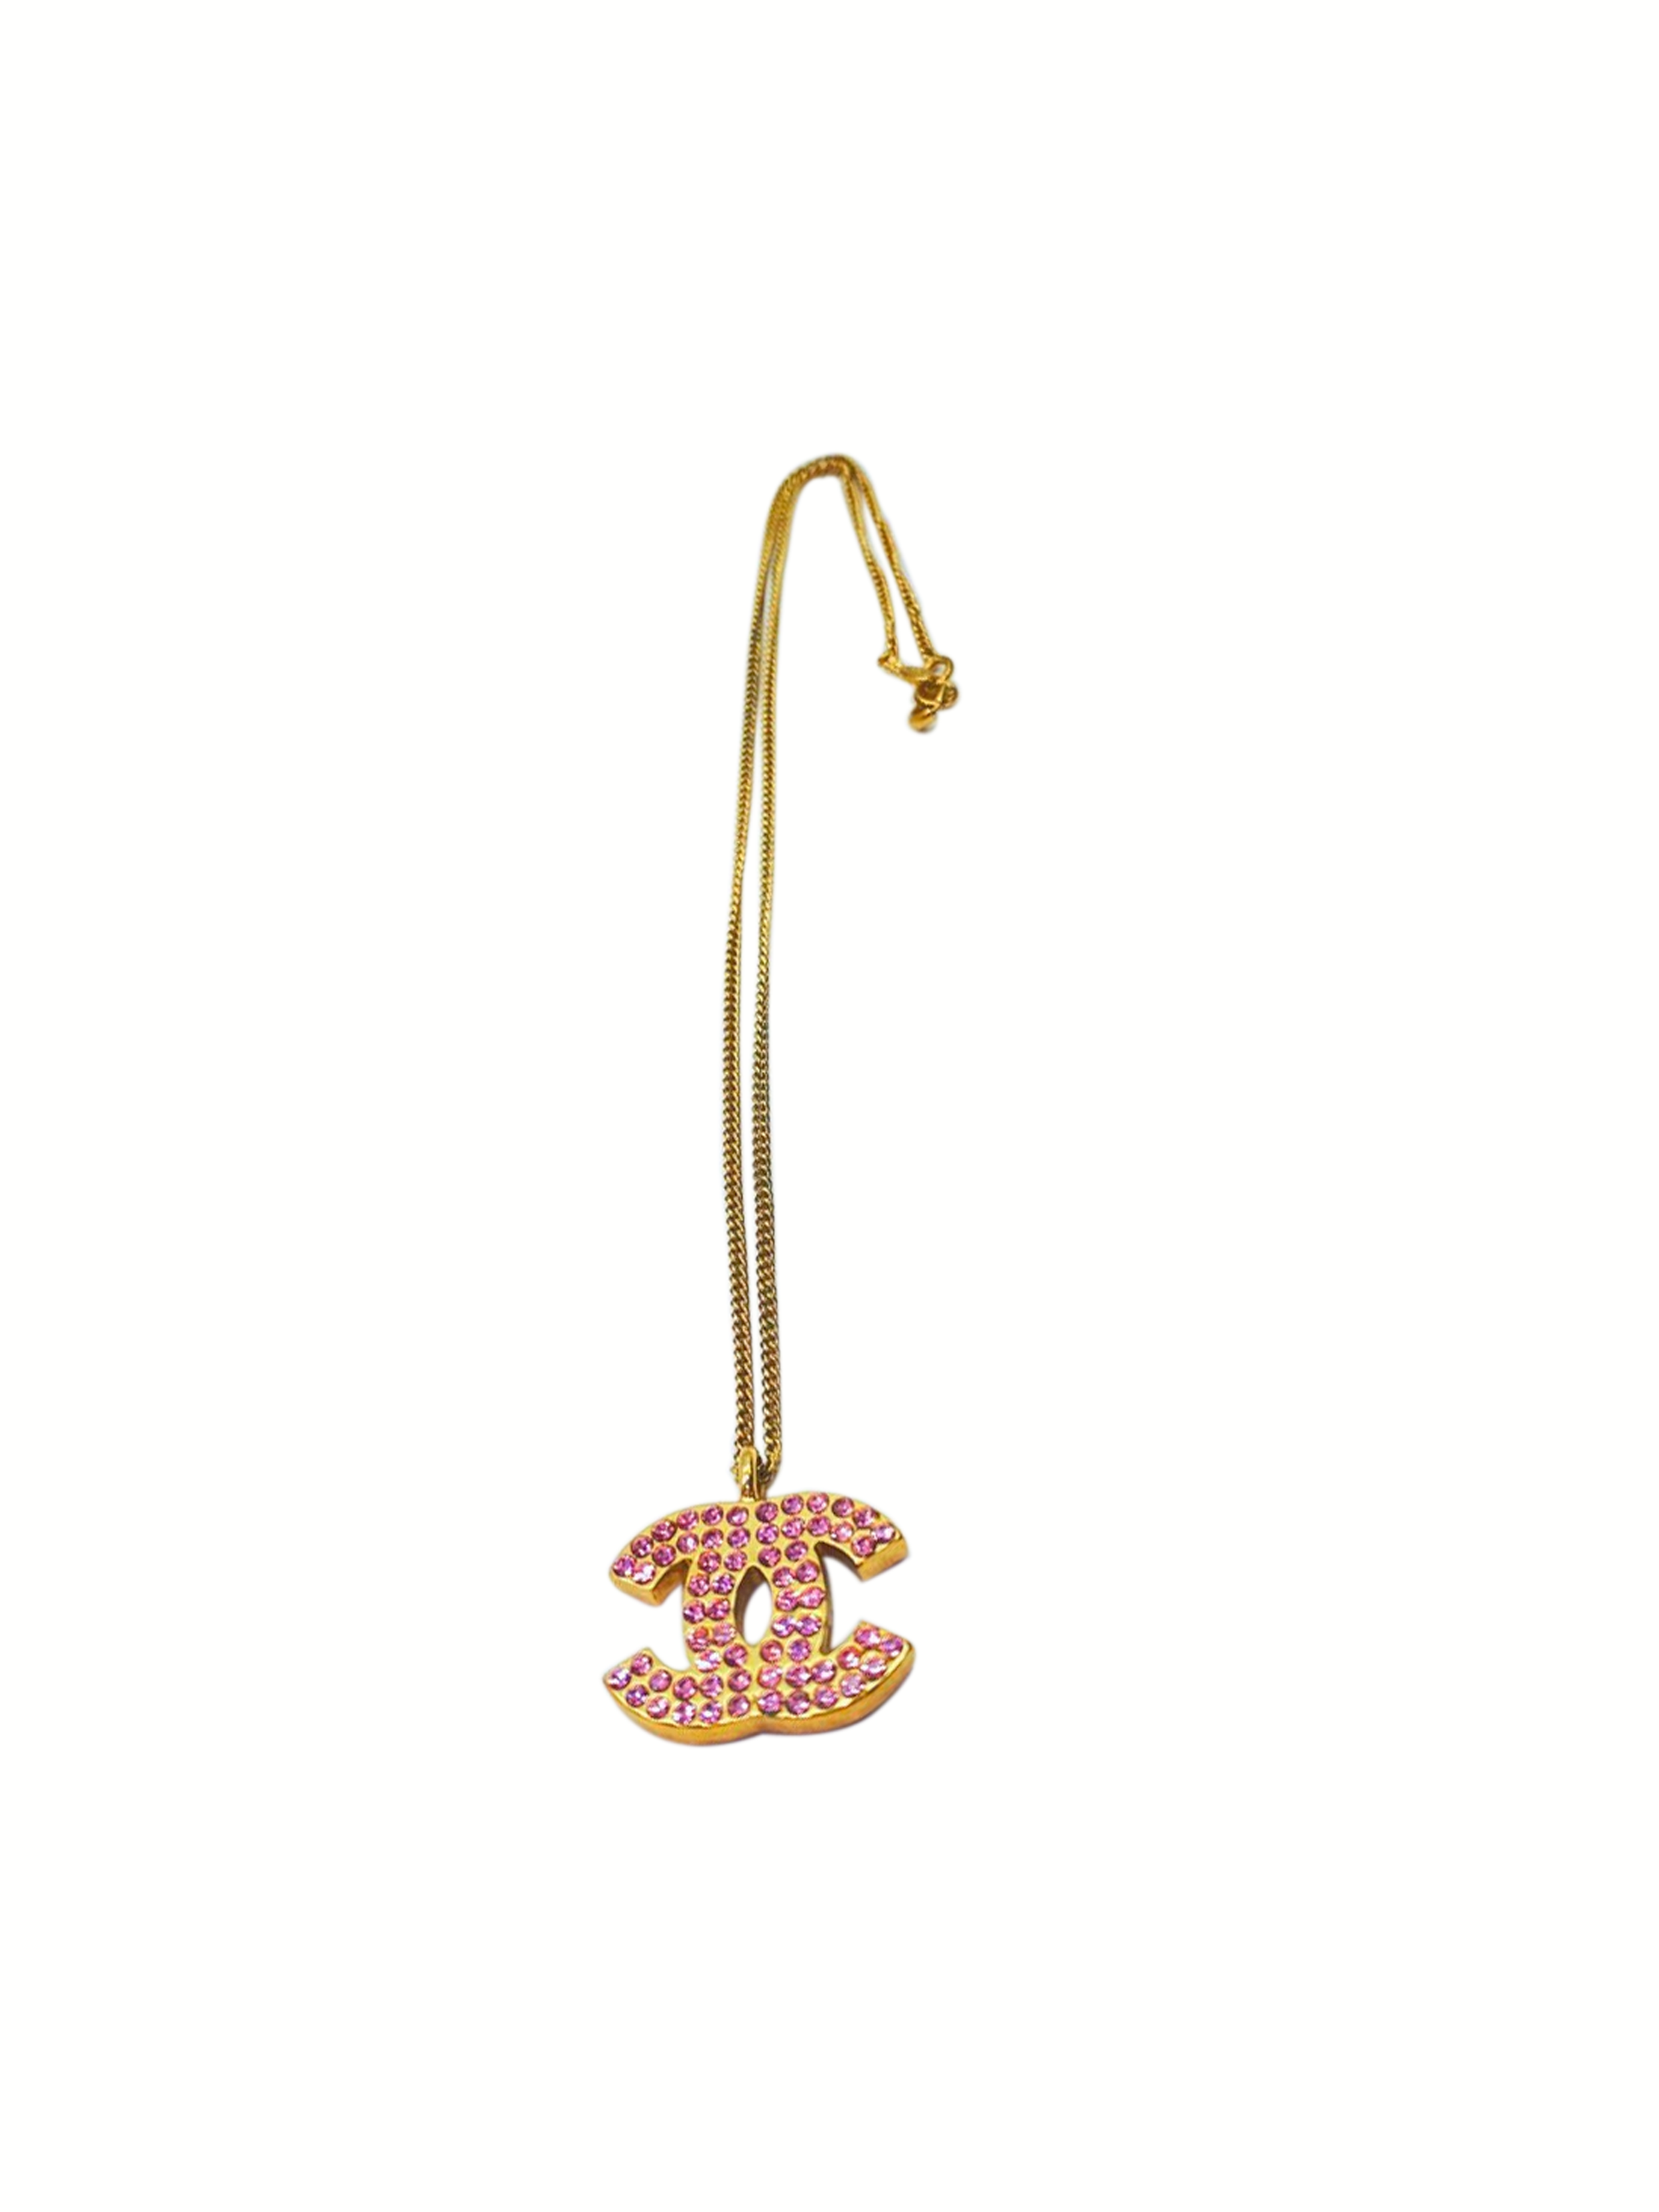 Chanel 2000s Pink CC Charm Necklace